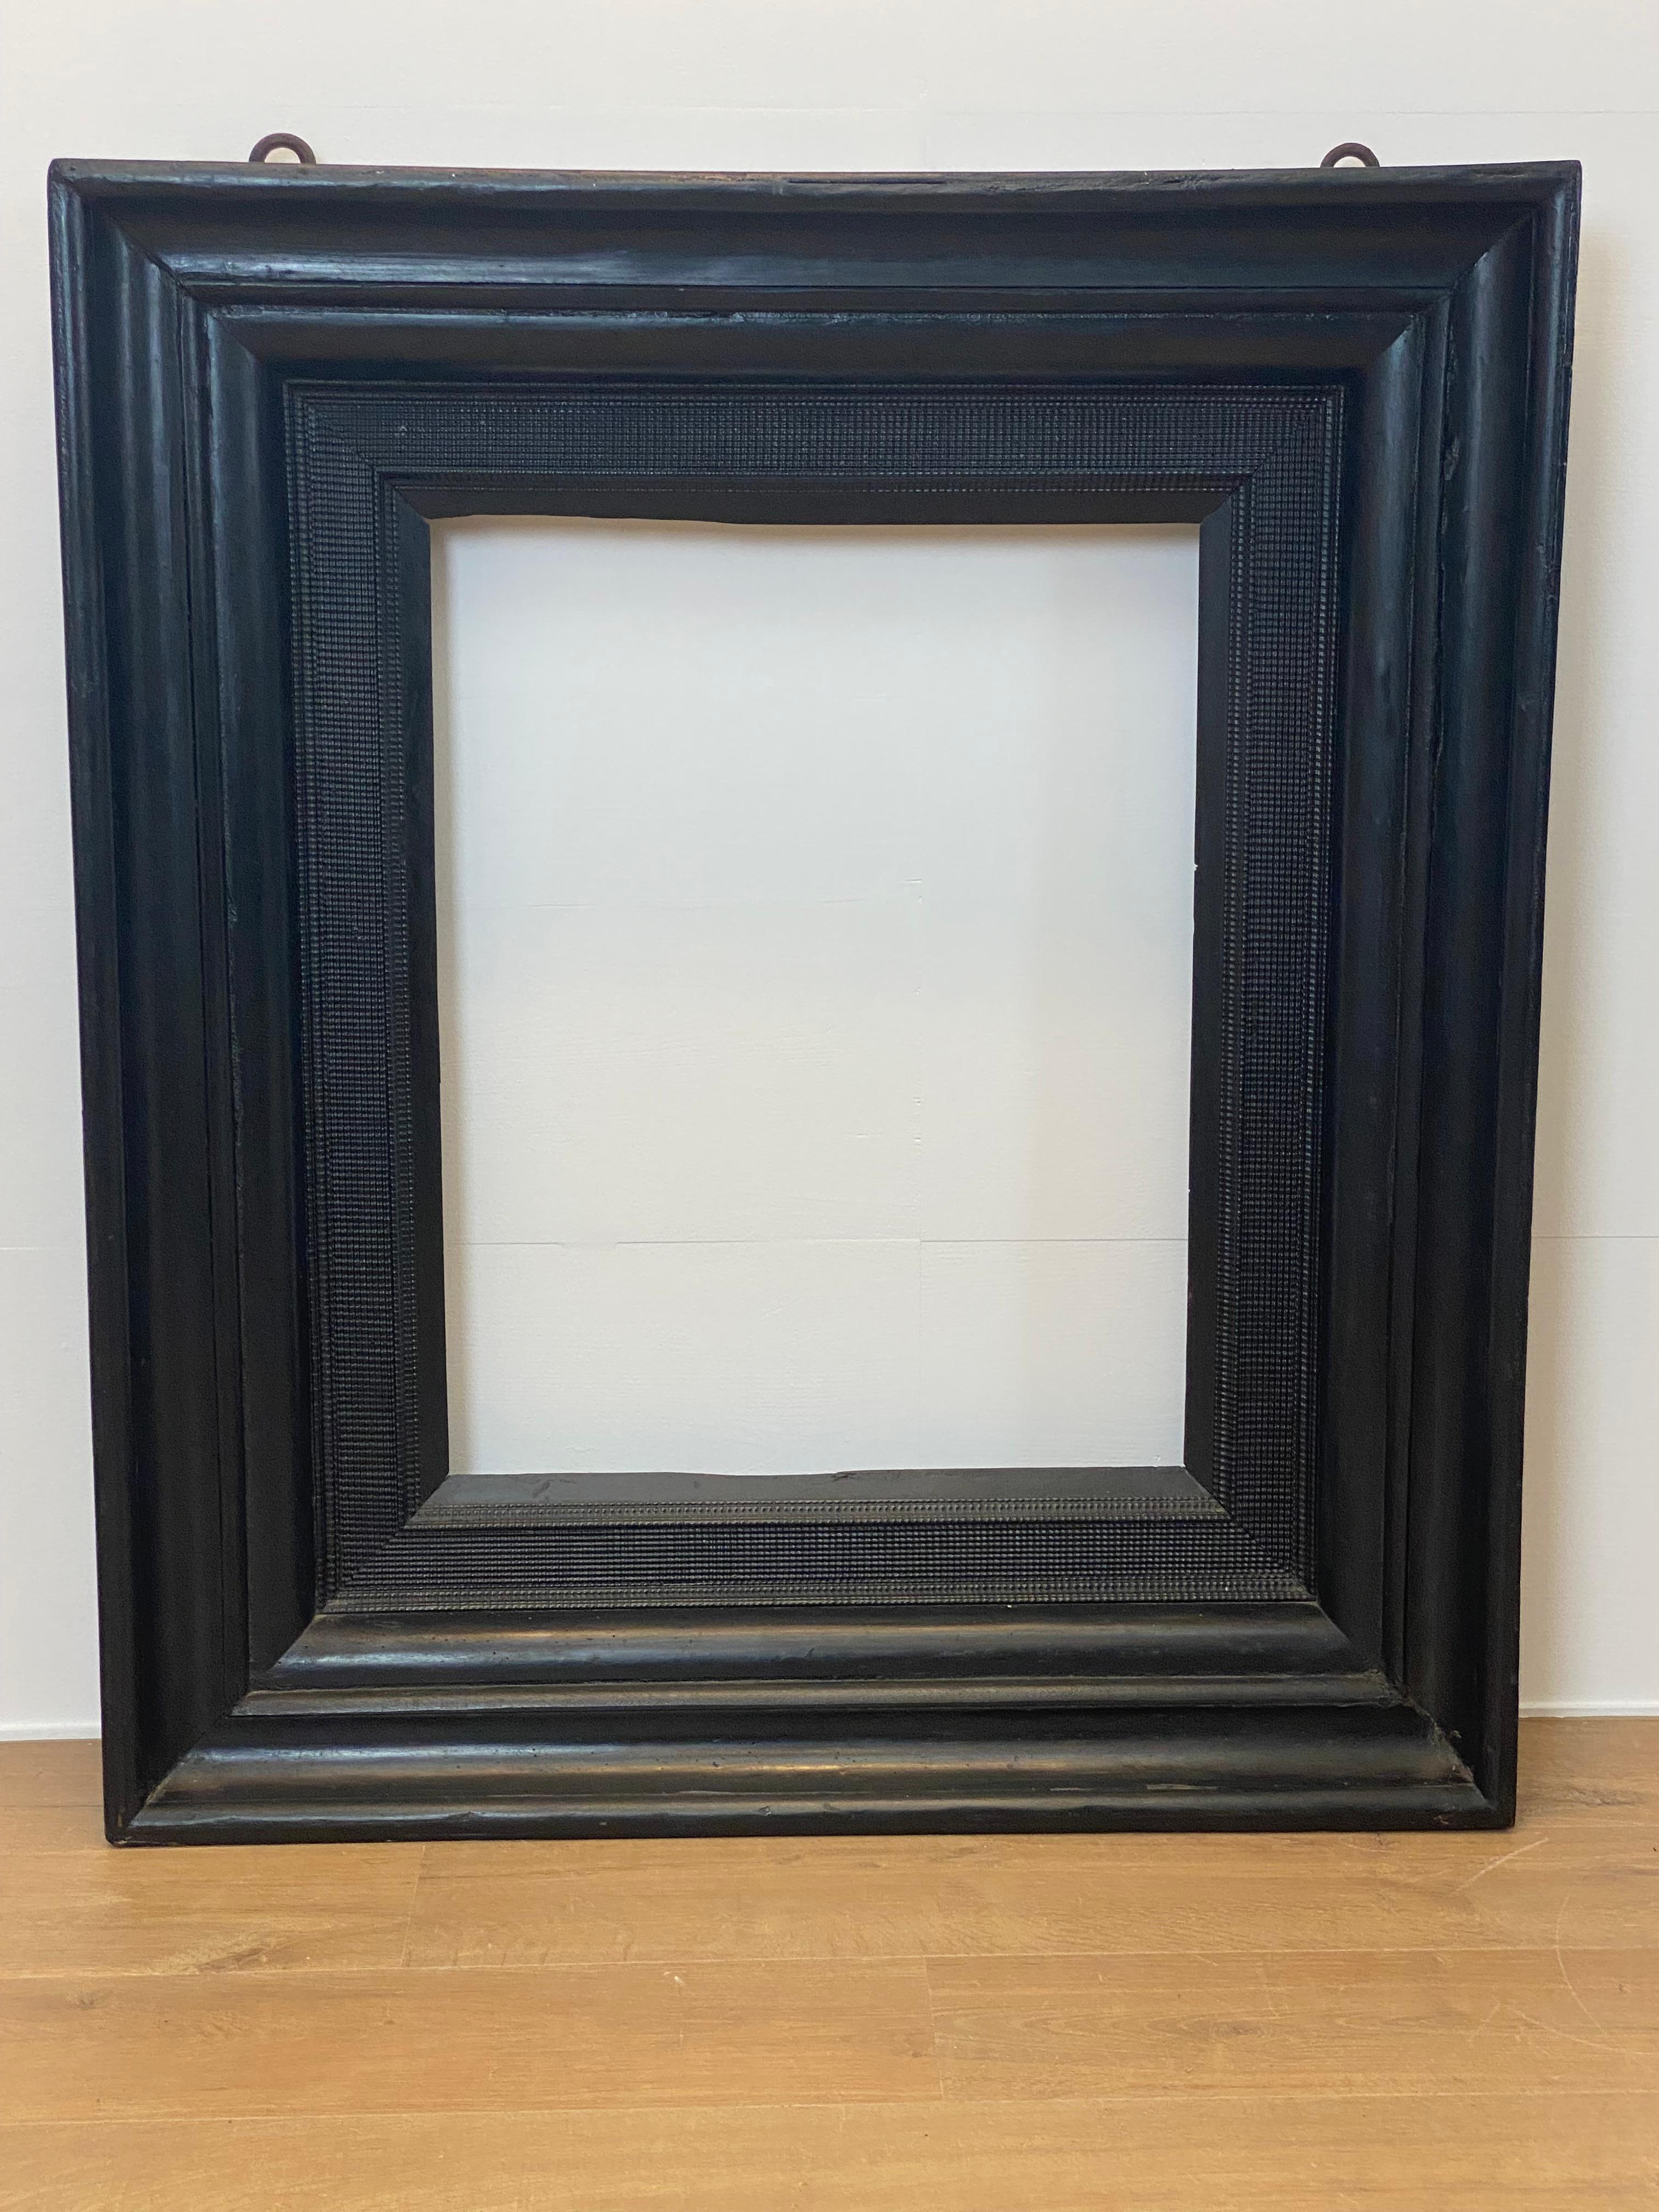 Exceptional antique wooden frame from Italy, 17th century,
made in a black patinated Fruitwood,
simple design and simple decorations,
beautiful patina and wear of the wood,
can be used for different purposes,
very decorative piece.